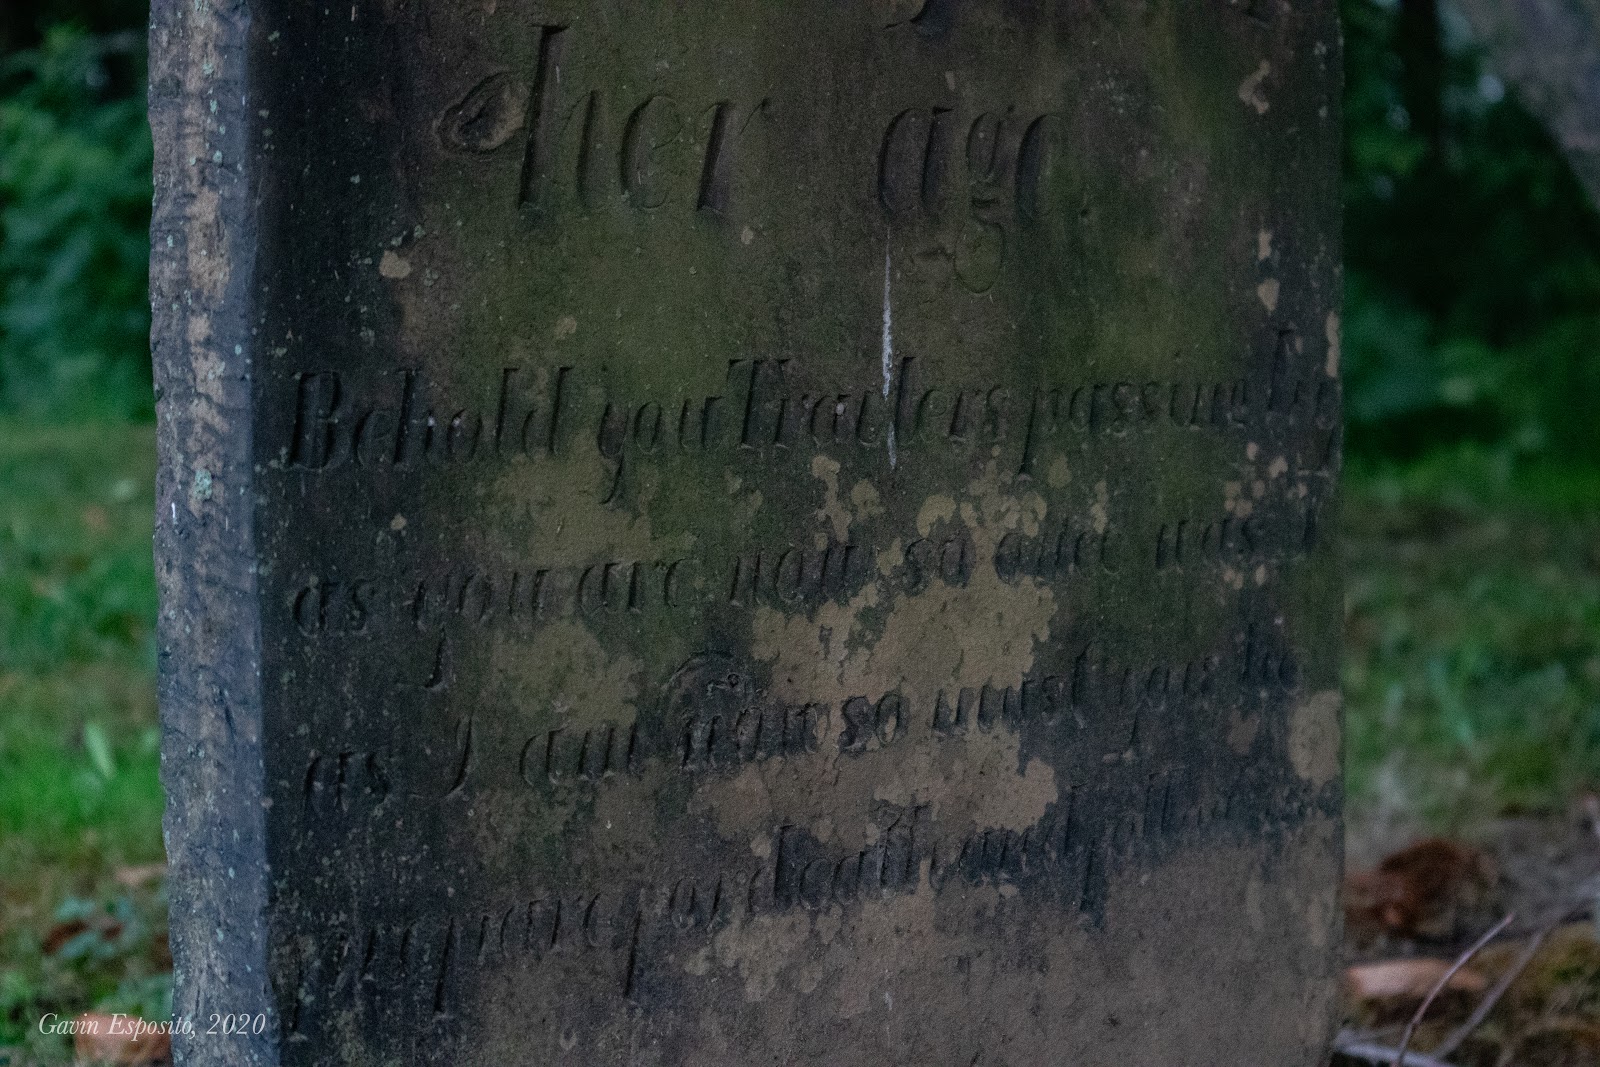 Although darkened by the passing of 187 years, Rhoda Luce Gardiner’s headstone still bears a legible warning regarding the unavoidable event of death: “Behold you Travelers passing by as you are now so once was I As I am now you shall be prepare for death and follow me” (Photo by Gavin Esposito).